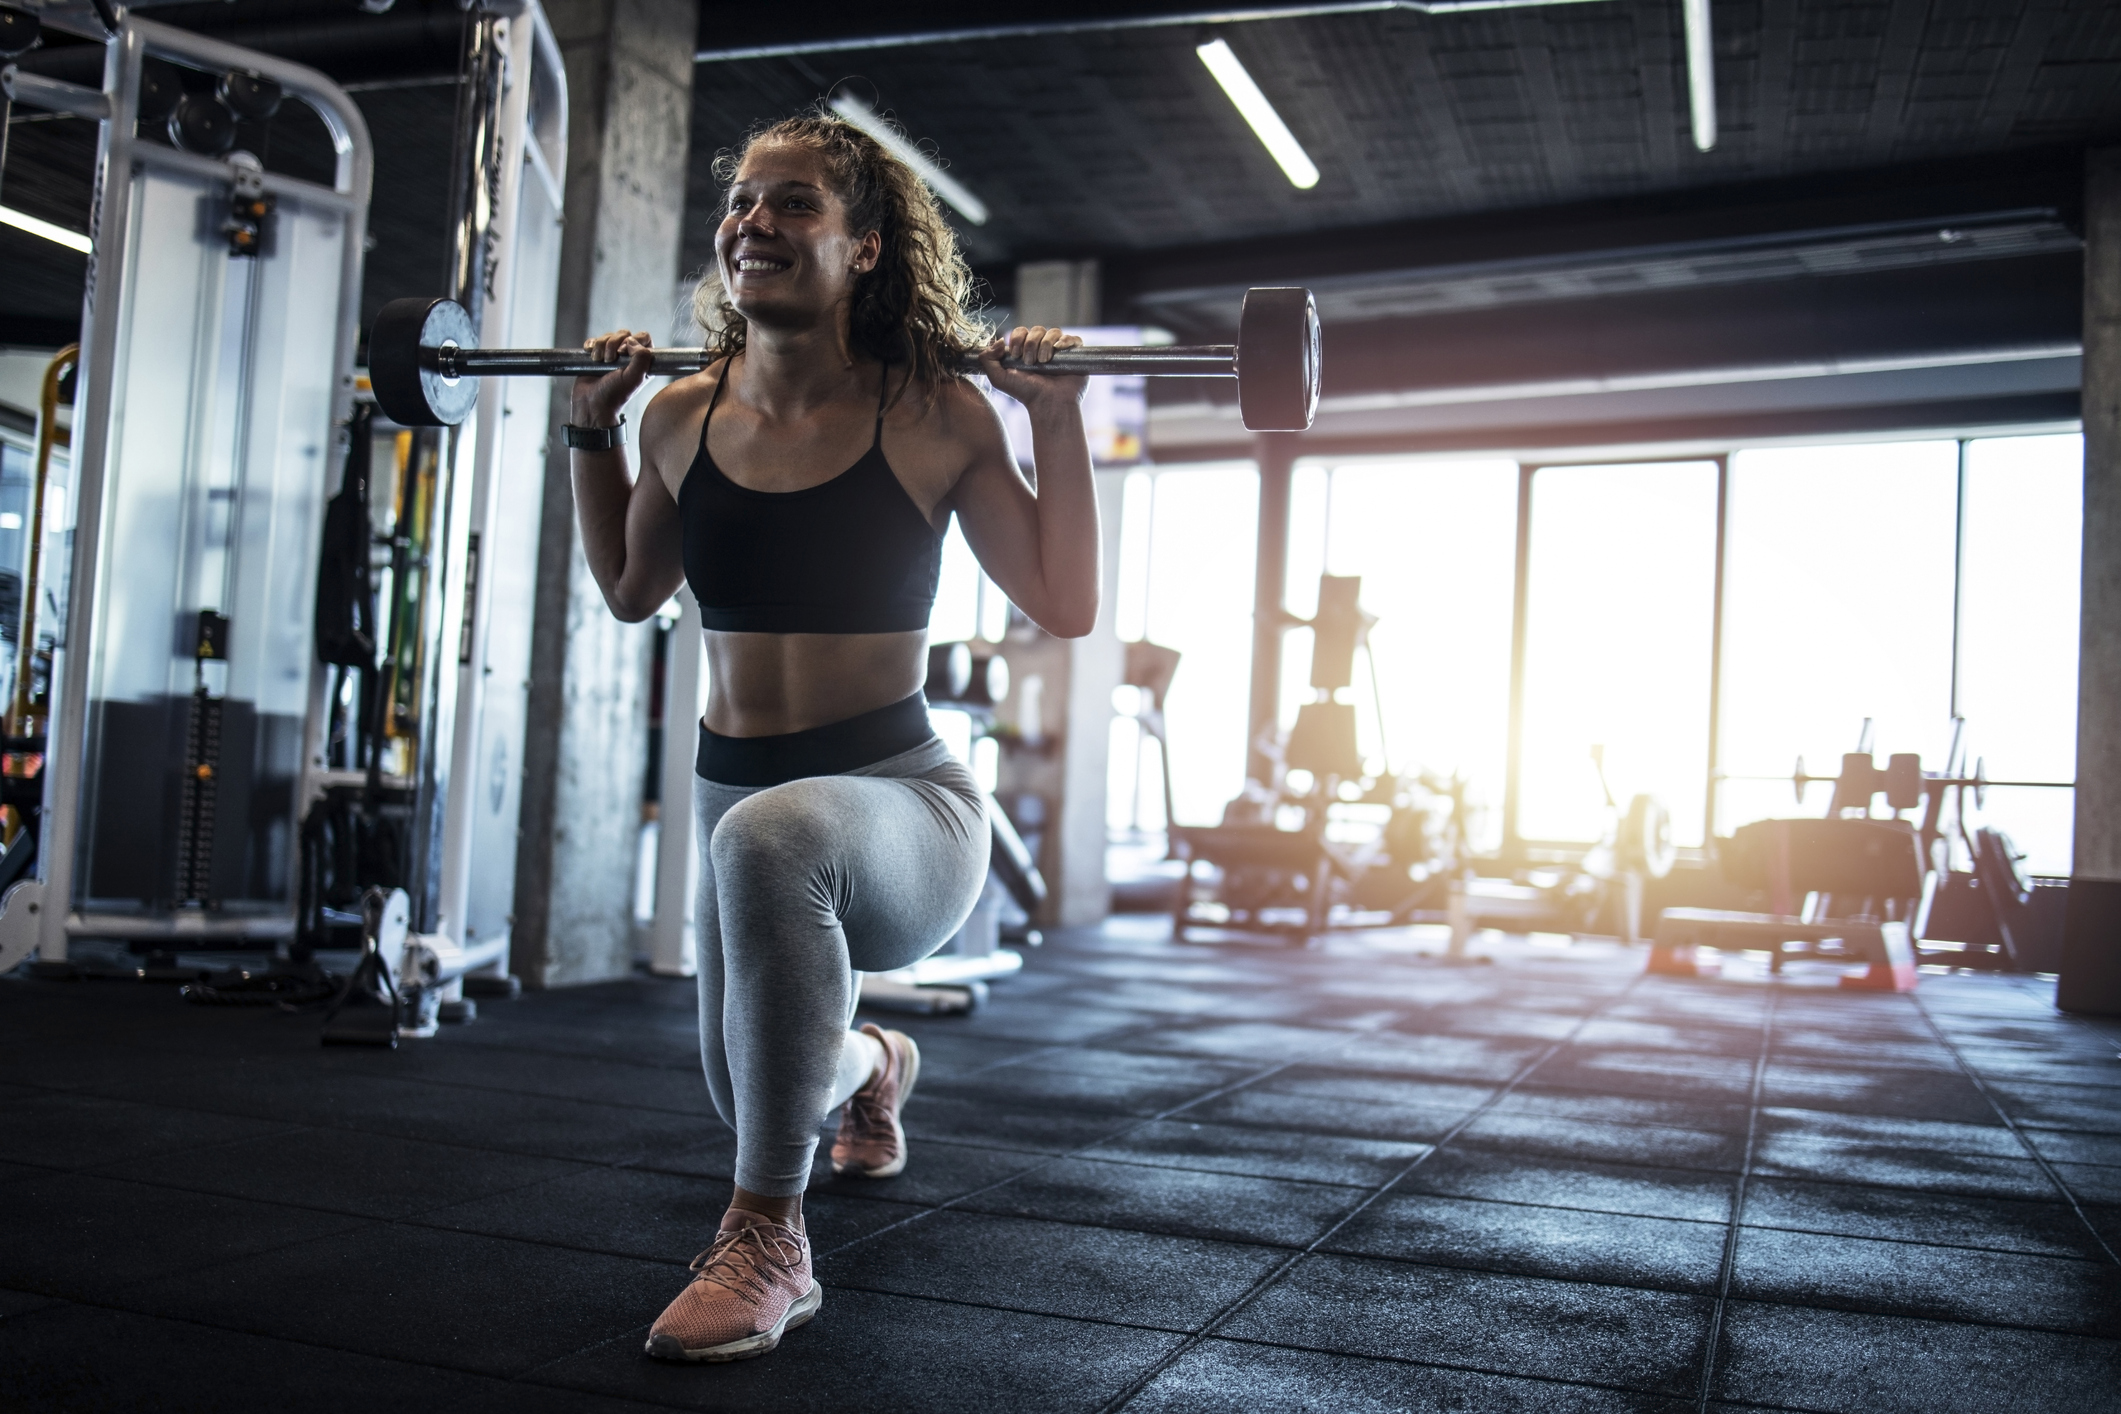 The Three Most Important Tips To Make That Gym Habit Stick This Year.